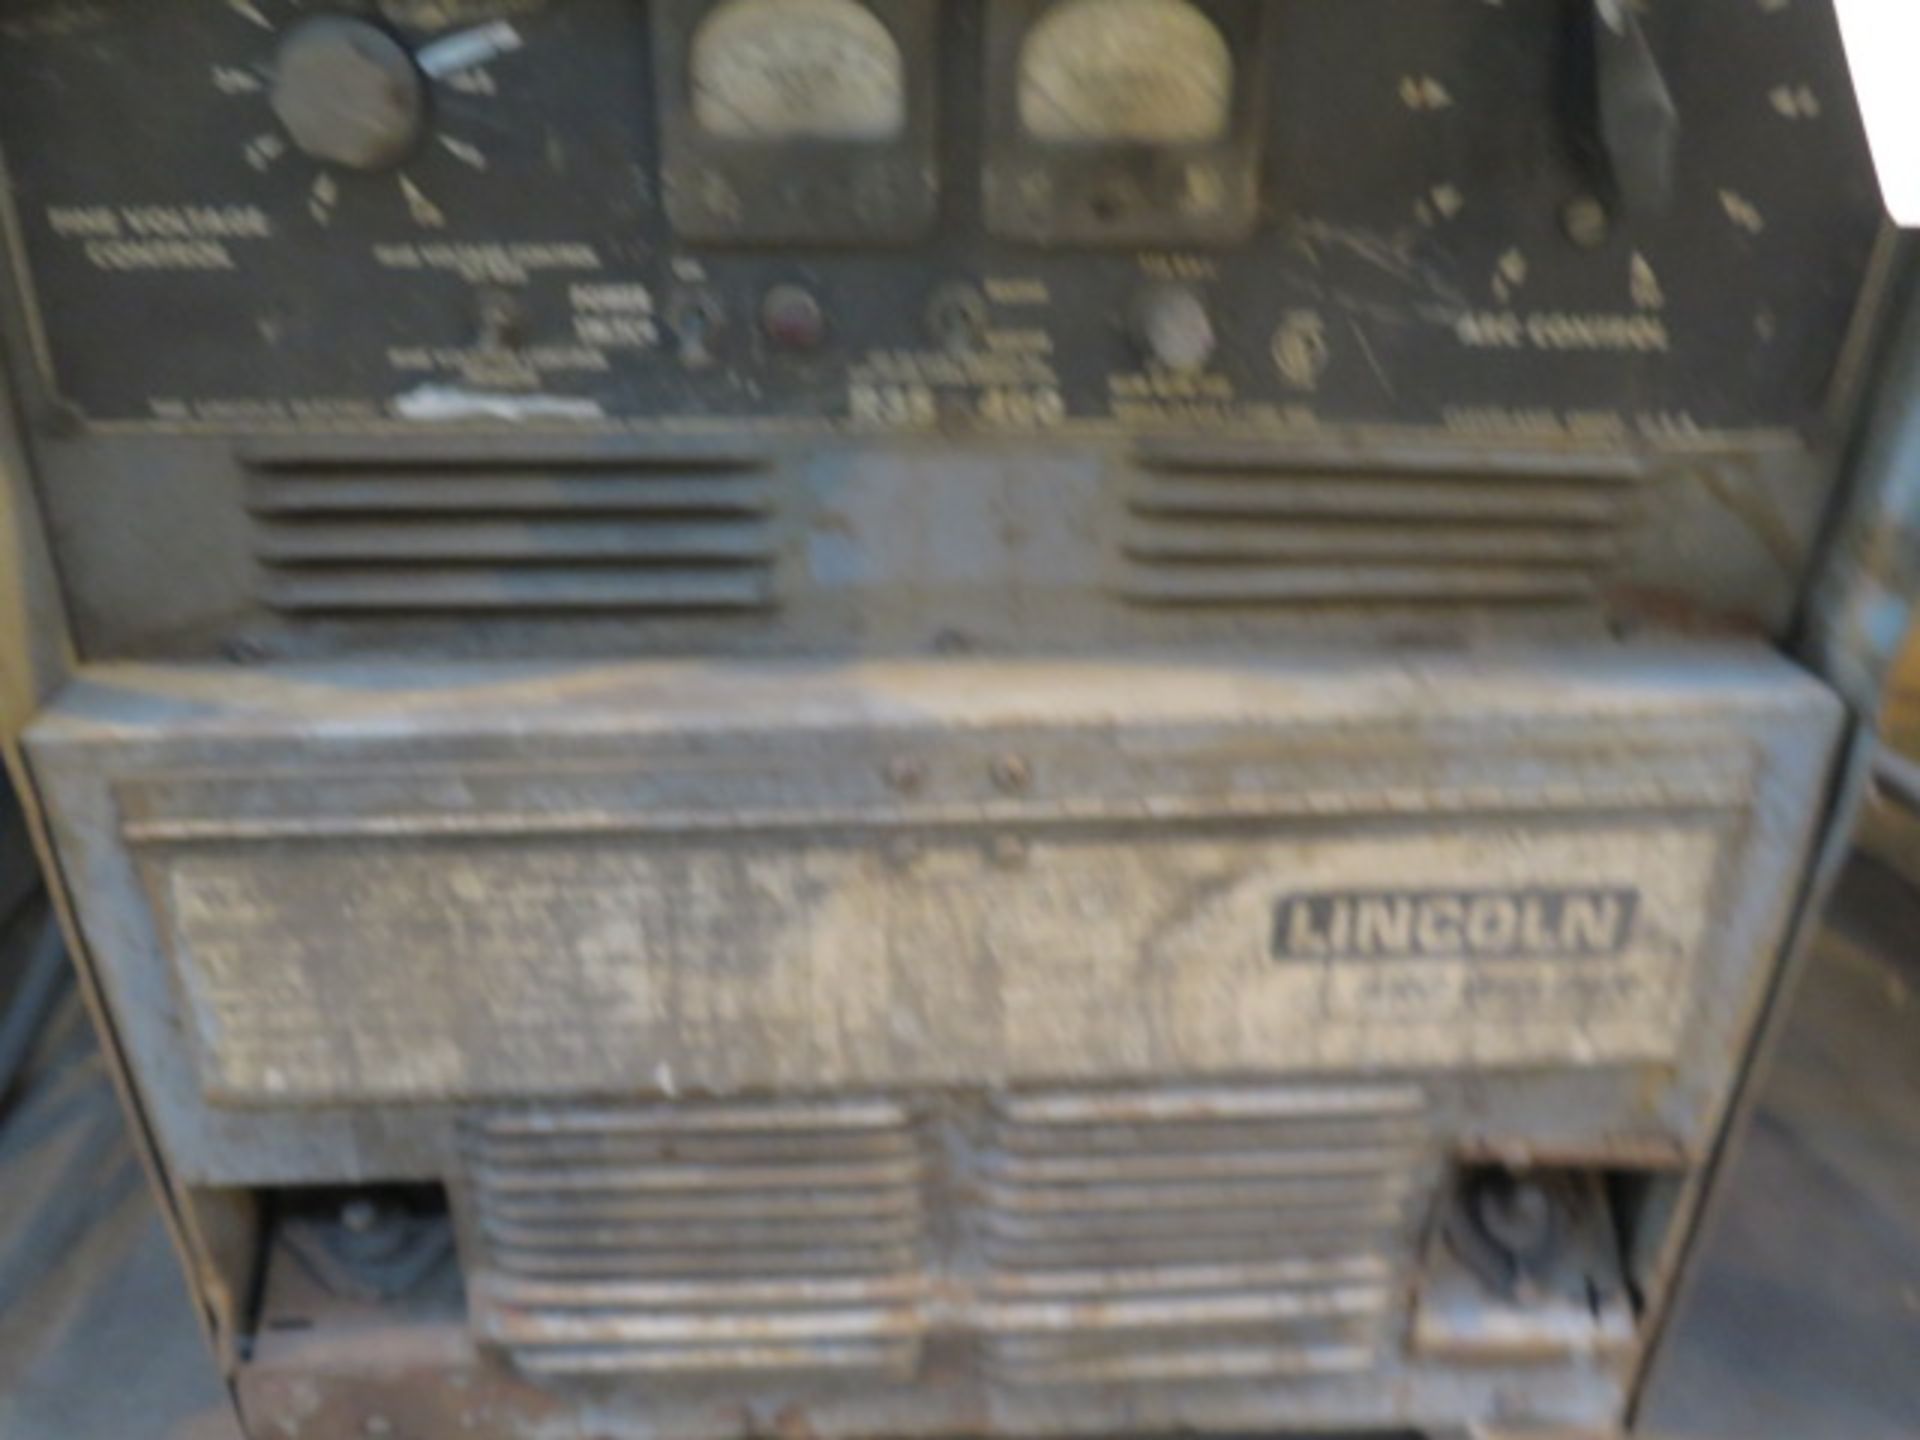 Lincoln R3S-400 CV-DC Arc Welding Power Source - Image 3 of 3